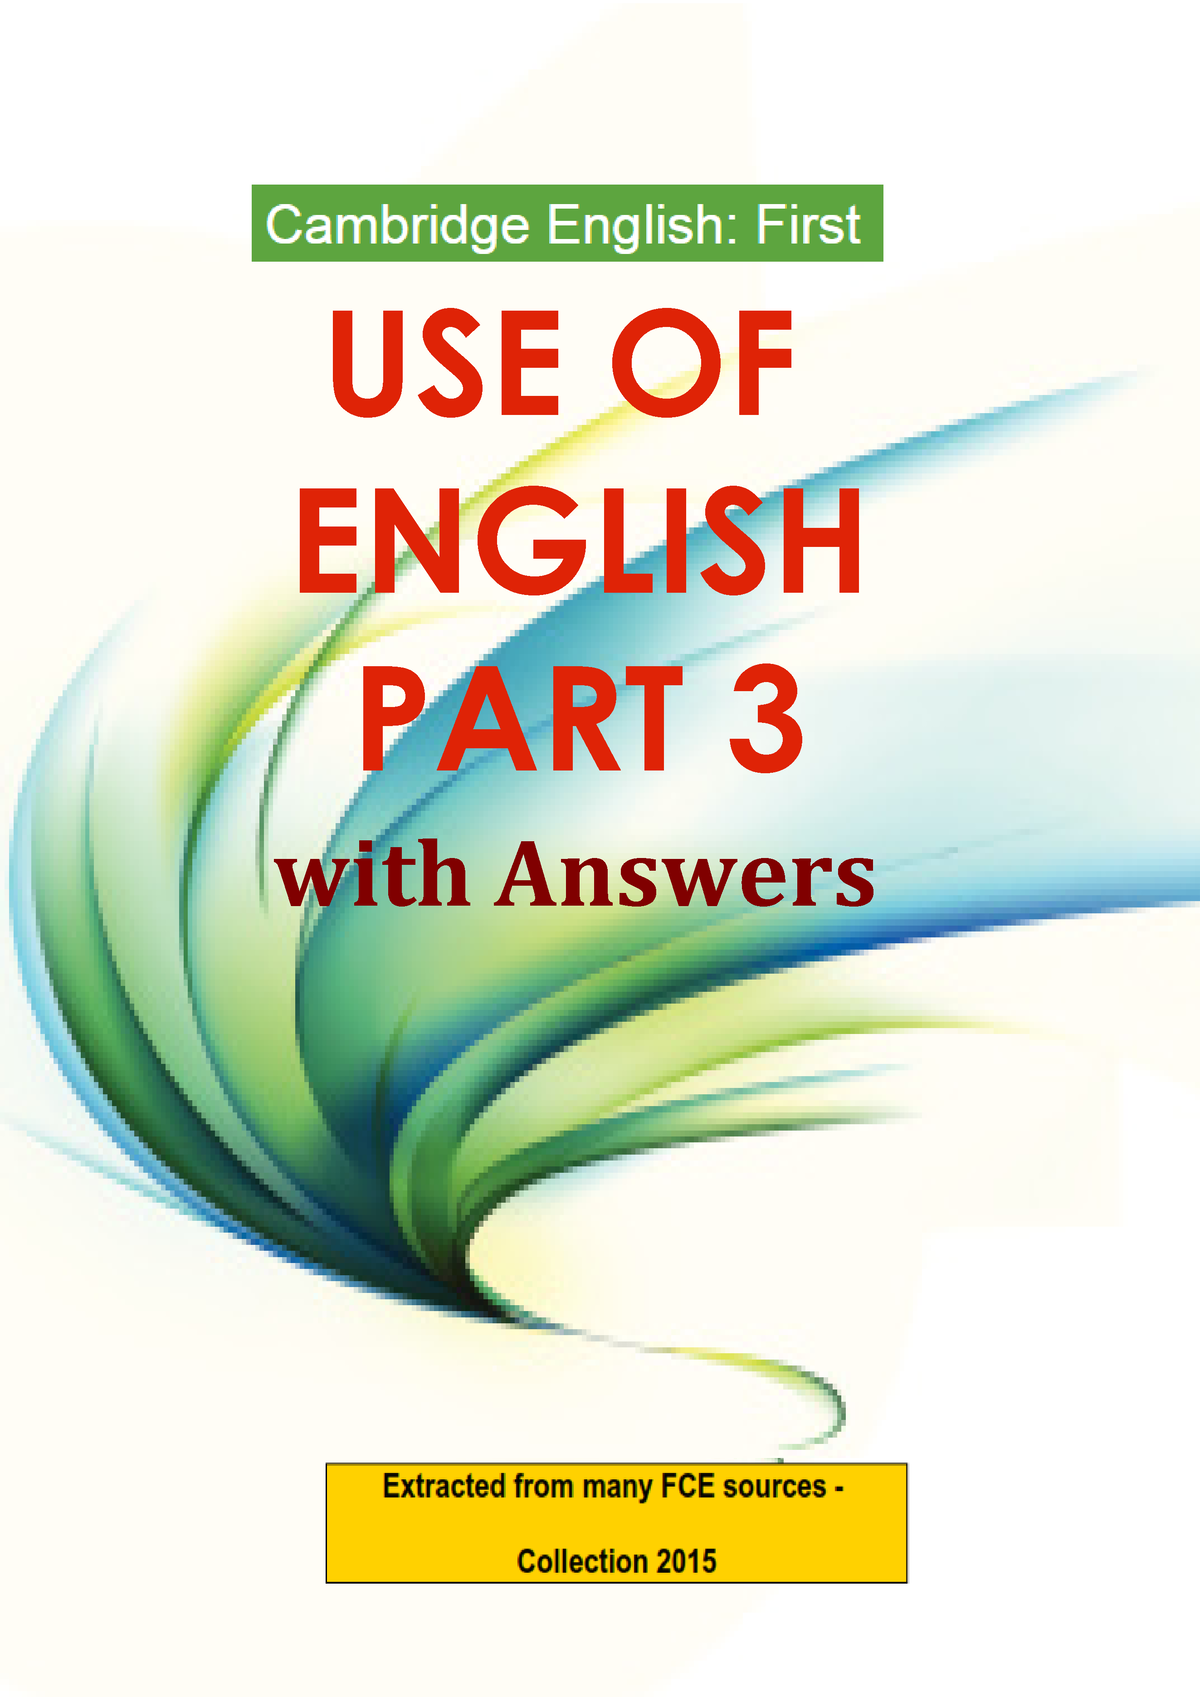 cambridge-part-3-use-of-english-with-answers-use-of-english-part-3